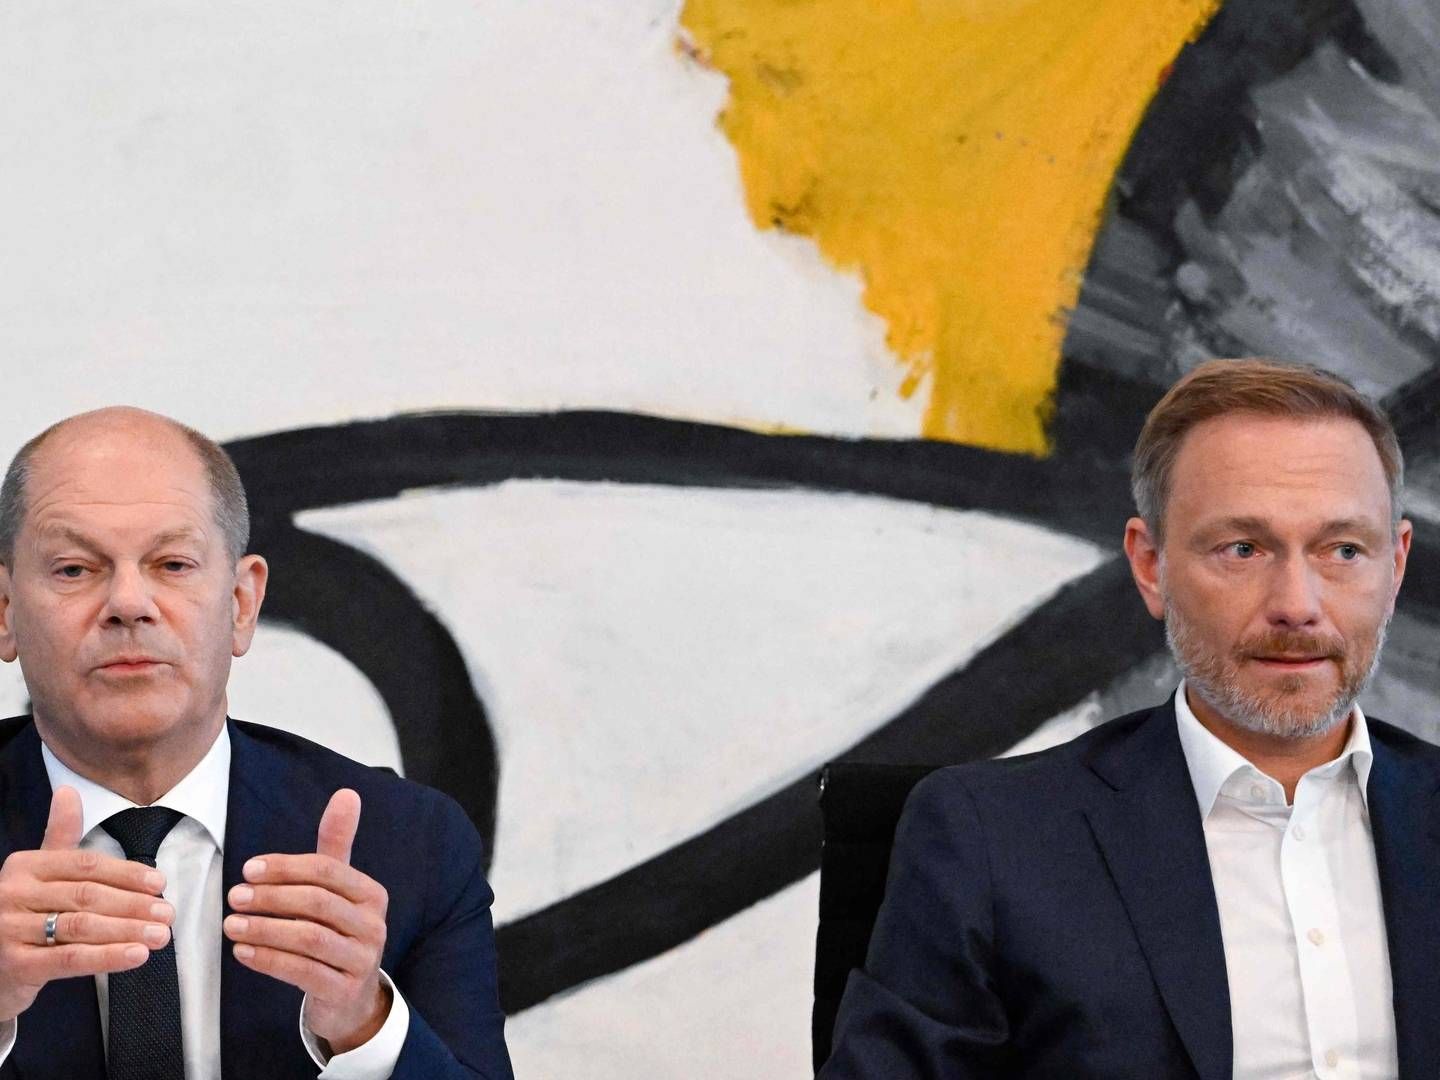 Chancellor Olaf Scholz (left) and Minister of Finance Christian Lindner hold a press conference about financial aid plans as inflation and energy prices soar. | Photo: Tobias Schwarz / AFP